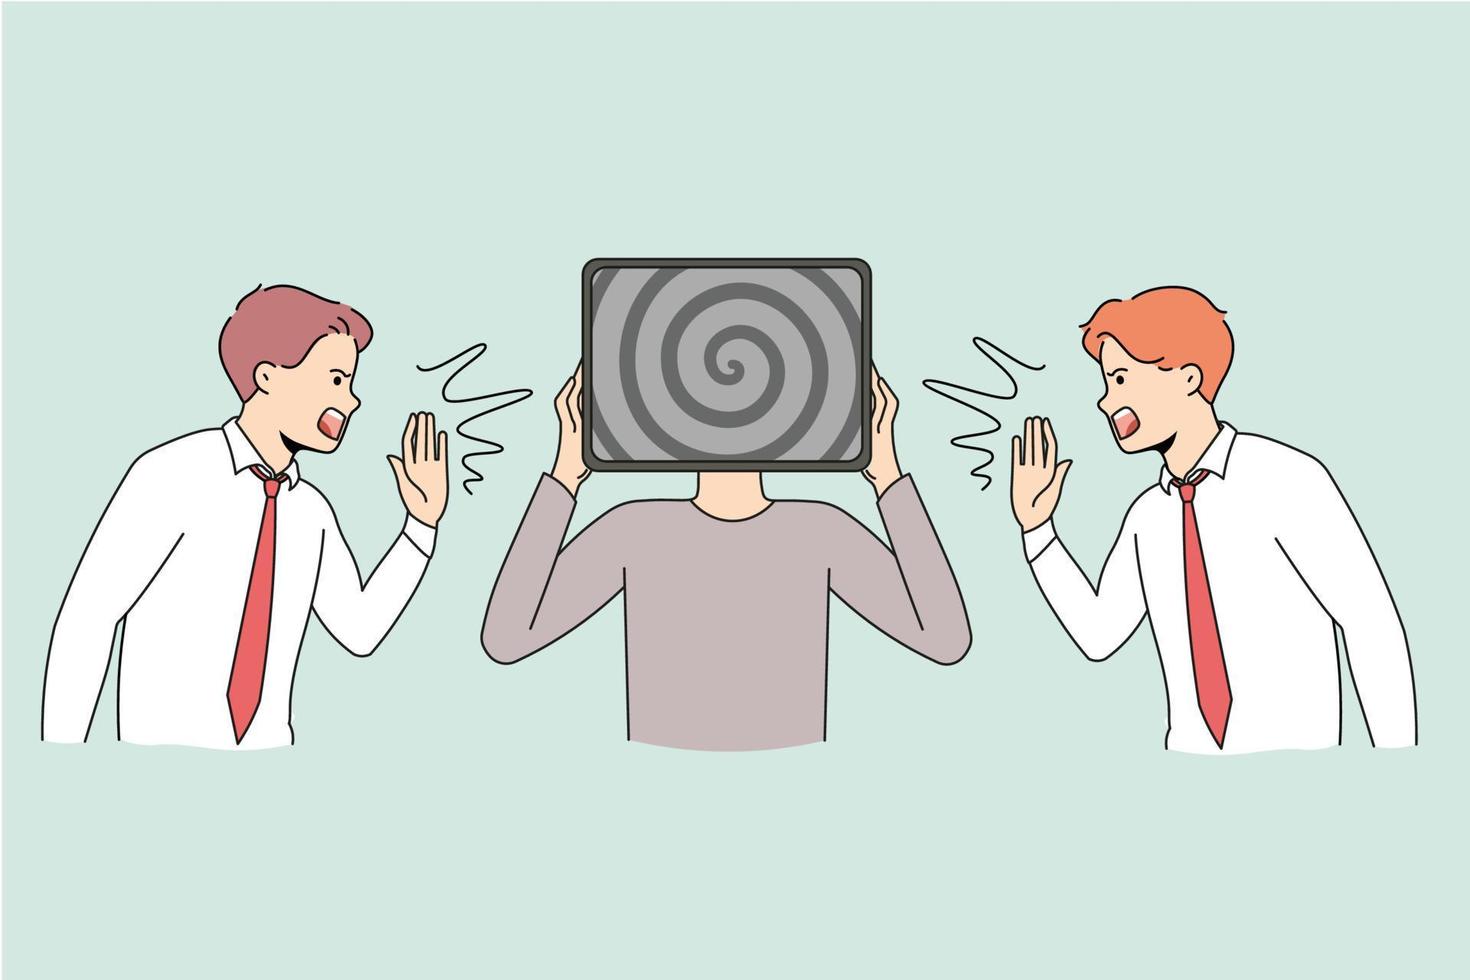 Men screaming to person feeling overwhelmed with information from TV screen. People shout and yell advertising content. Concept of data war or overwhelm. Vector illustration.